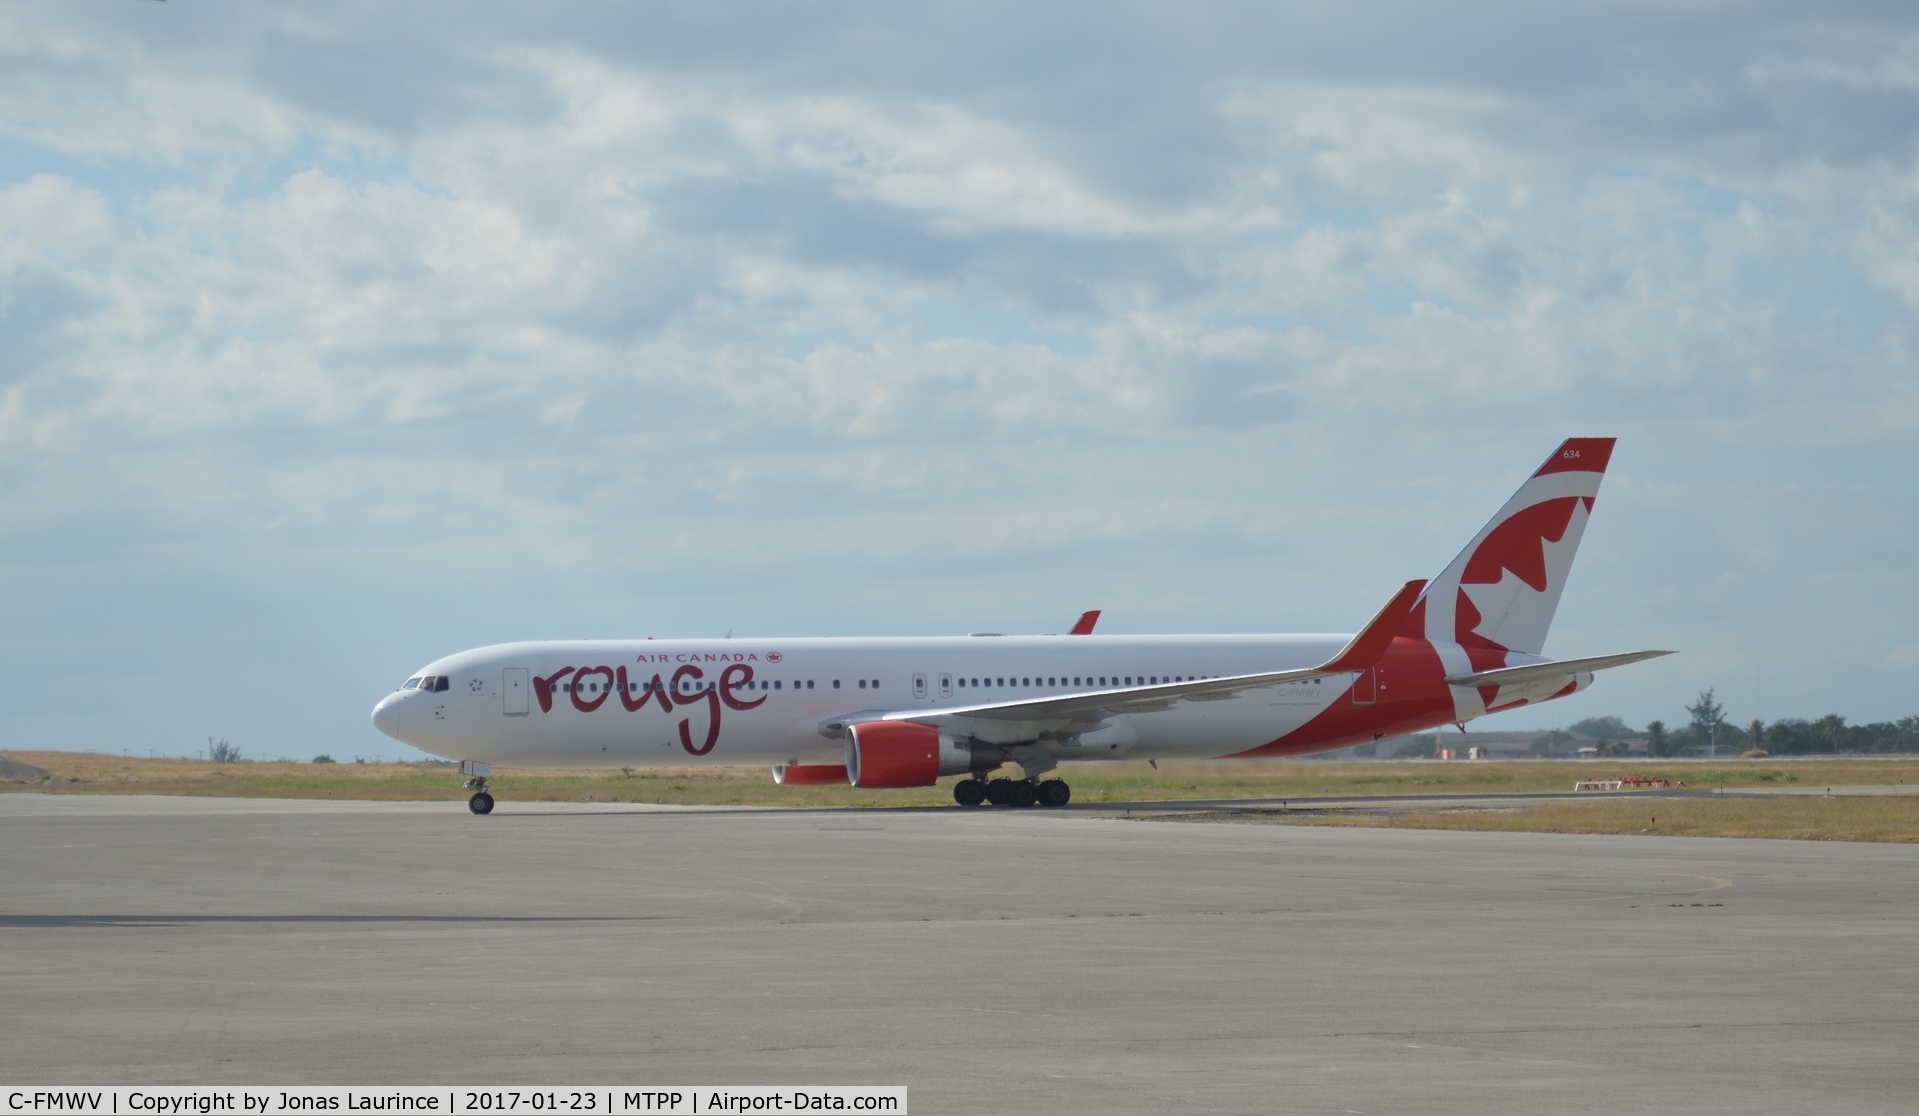 C-FMWV, 1995 Boeing 767-333/ER C/N 25586, Aircraft Air Canada Rouge landing at the PAP